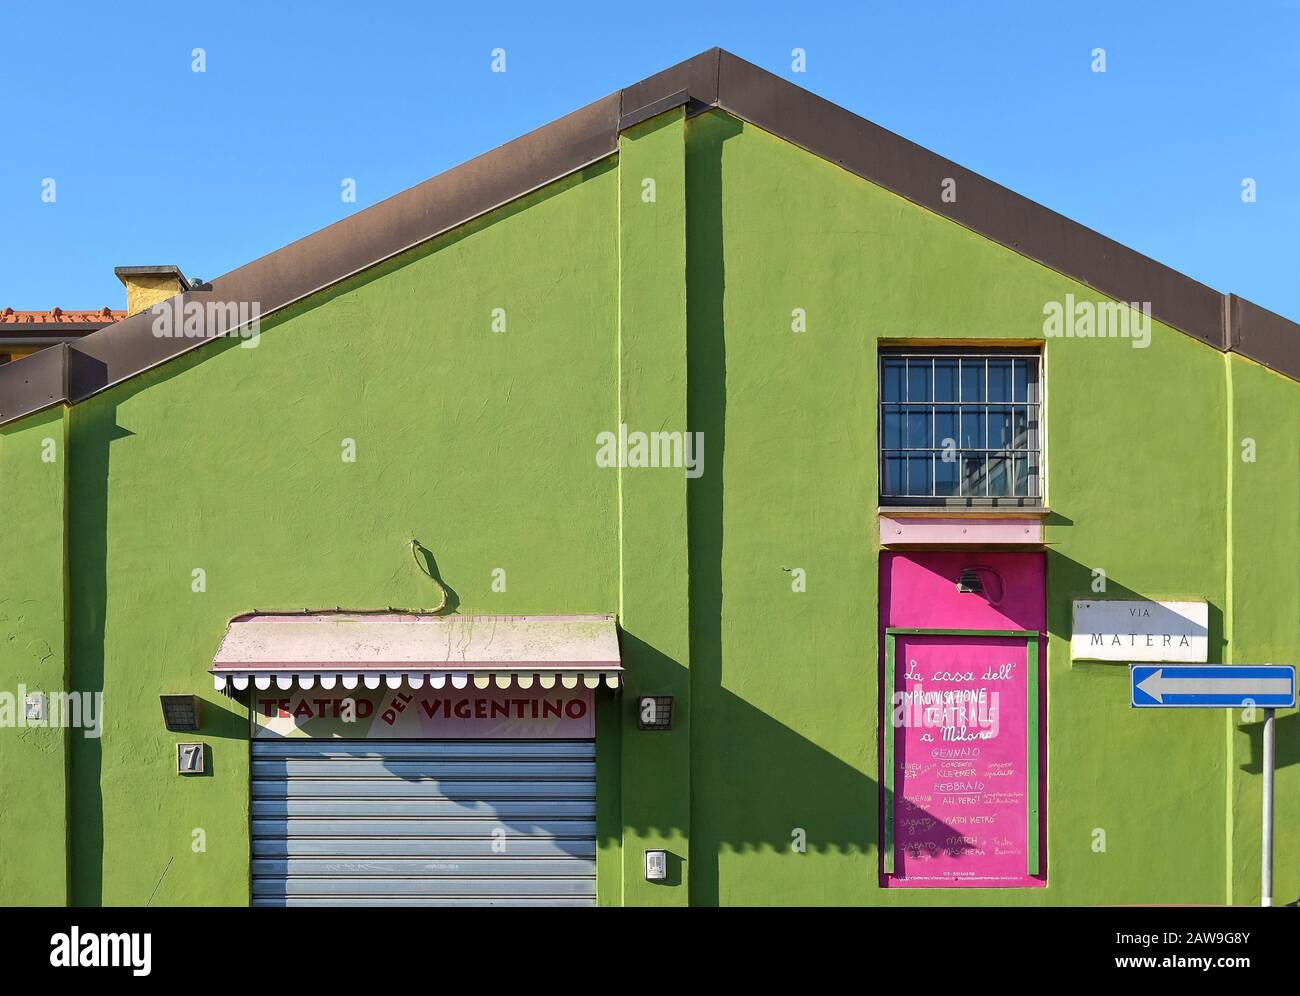 Old-fashioned factory shed with with a deep green facade on a blue sky, now used as a theatre of Vigentino, in the southern suburbs of Milan, Italy Stock Photo